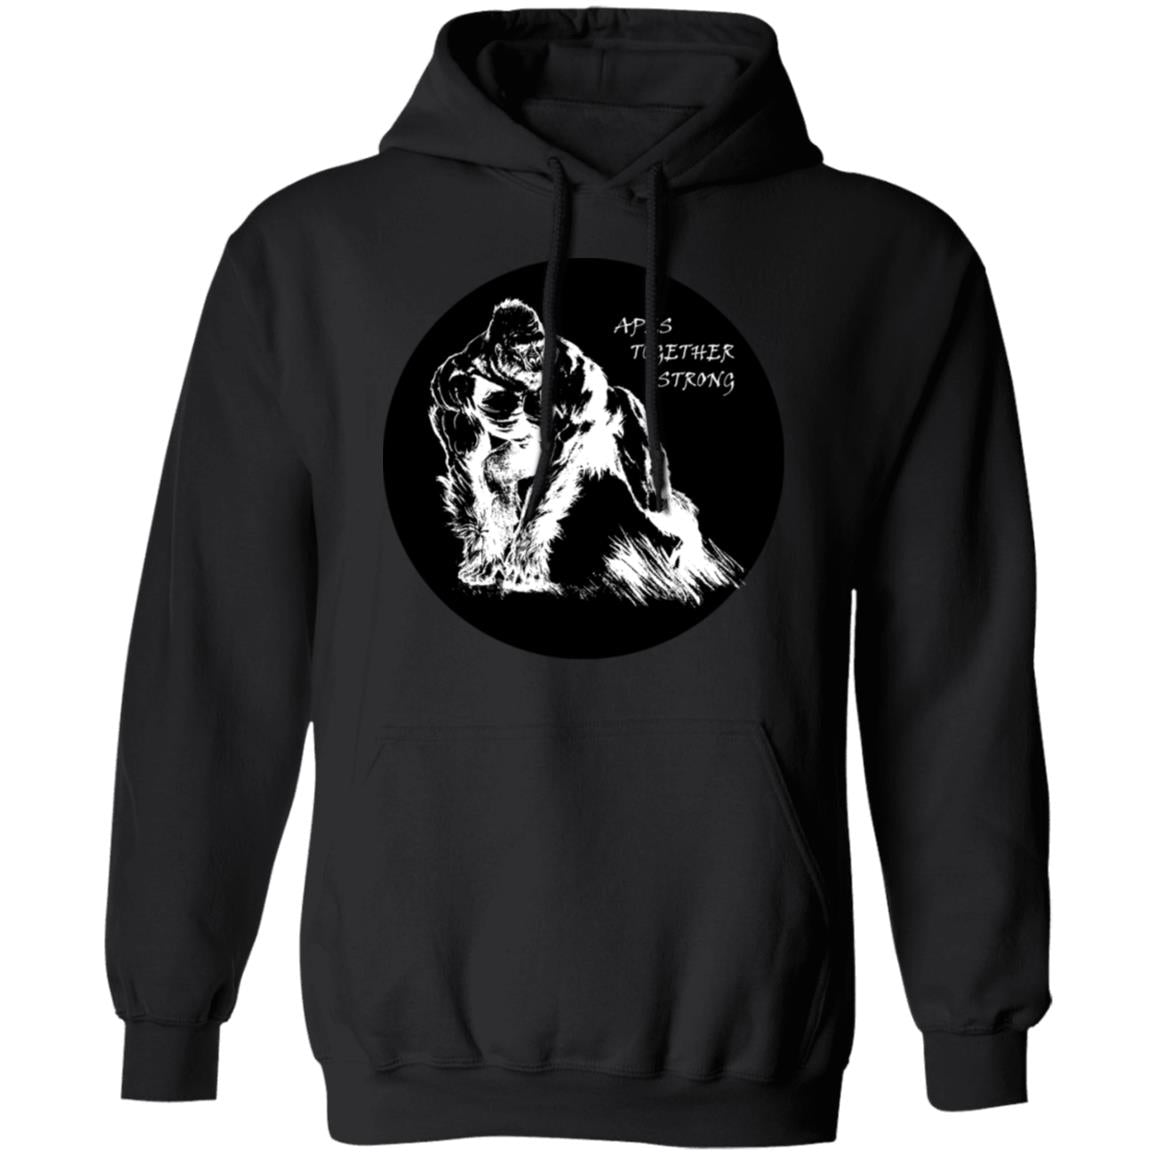 strong together hoodies